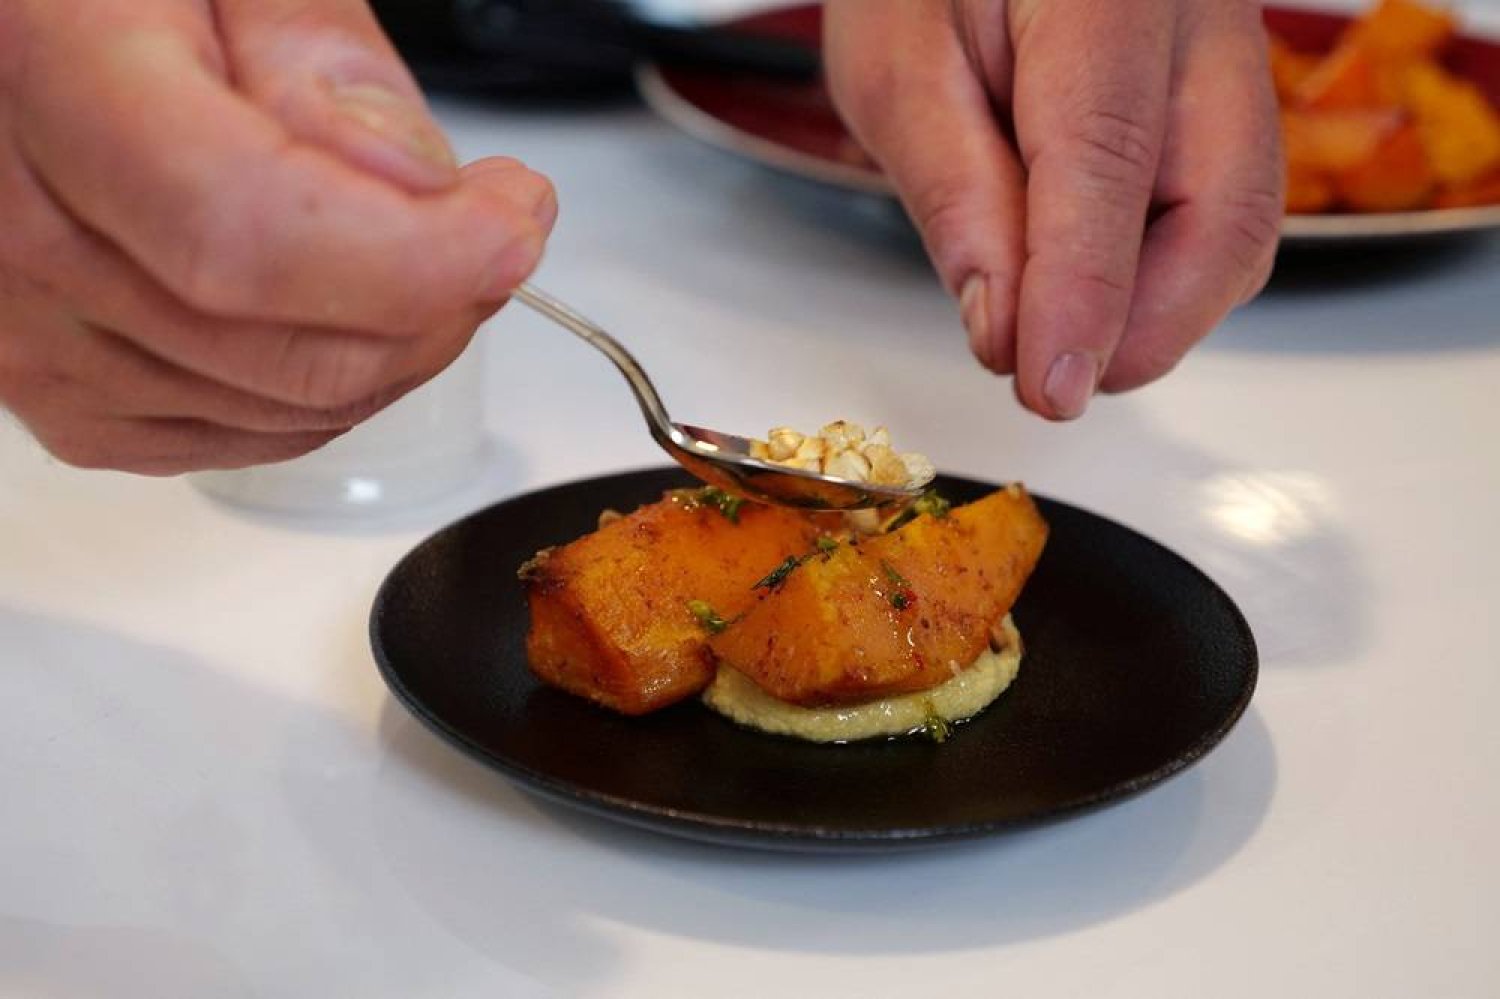  Charles Guilloy, the executive chef for the Paris 2024 Olympic Games, prepares one of the recipes that will be available at the athletes' village during the Paris 2024 Olympic and Paralympic Games, during a press presentation in Paris, France, April 30, 2024. (Reuters)